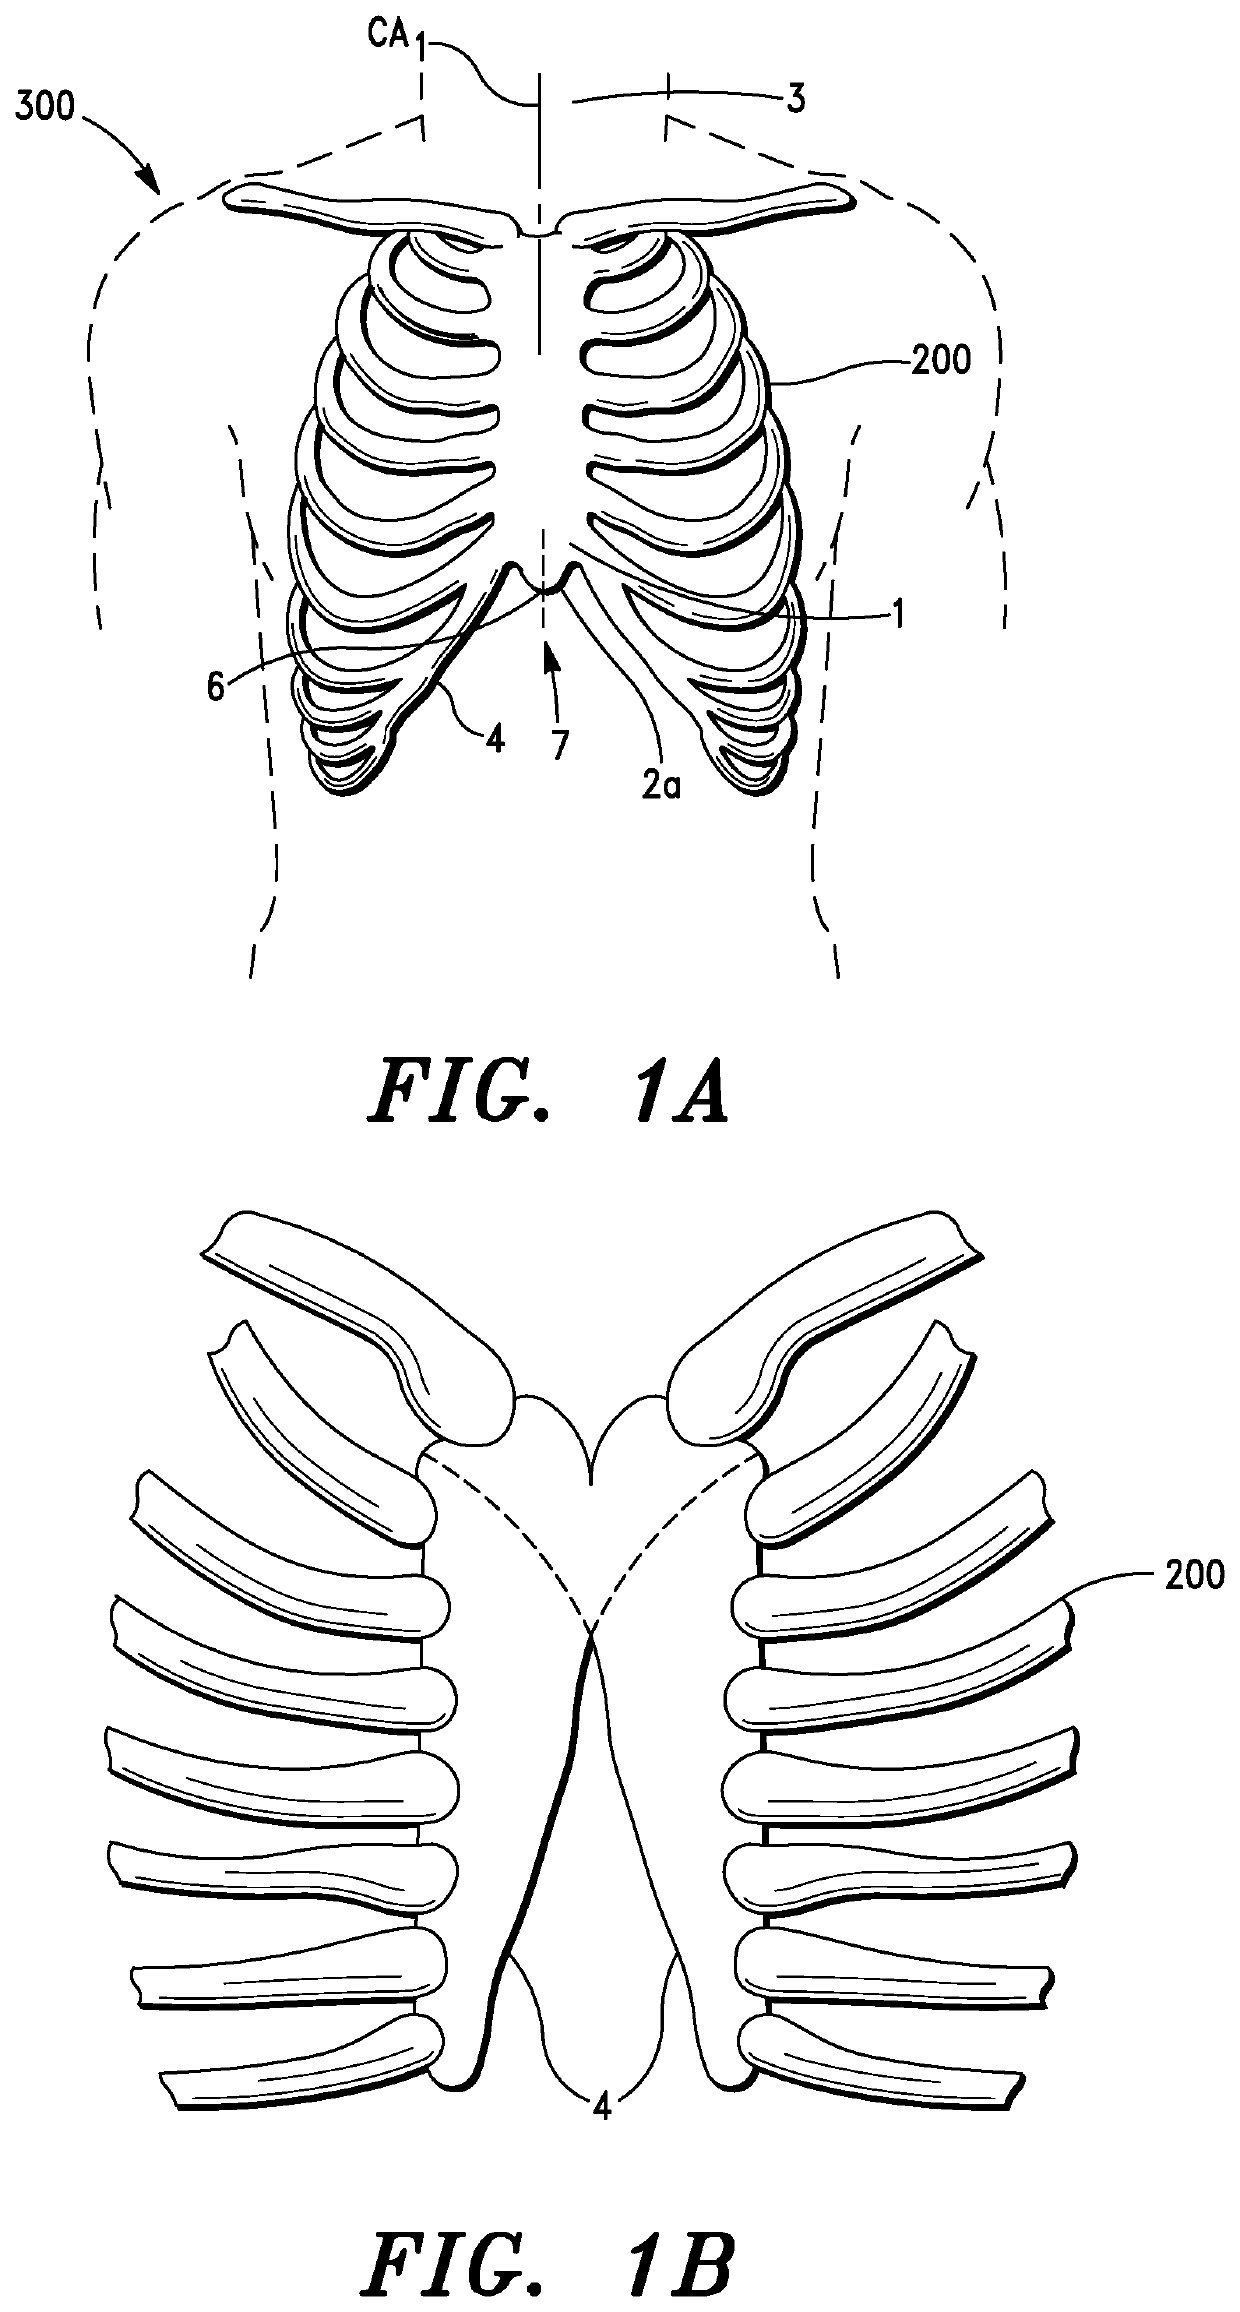 Thoracic structure access apparatus, systems and methods